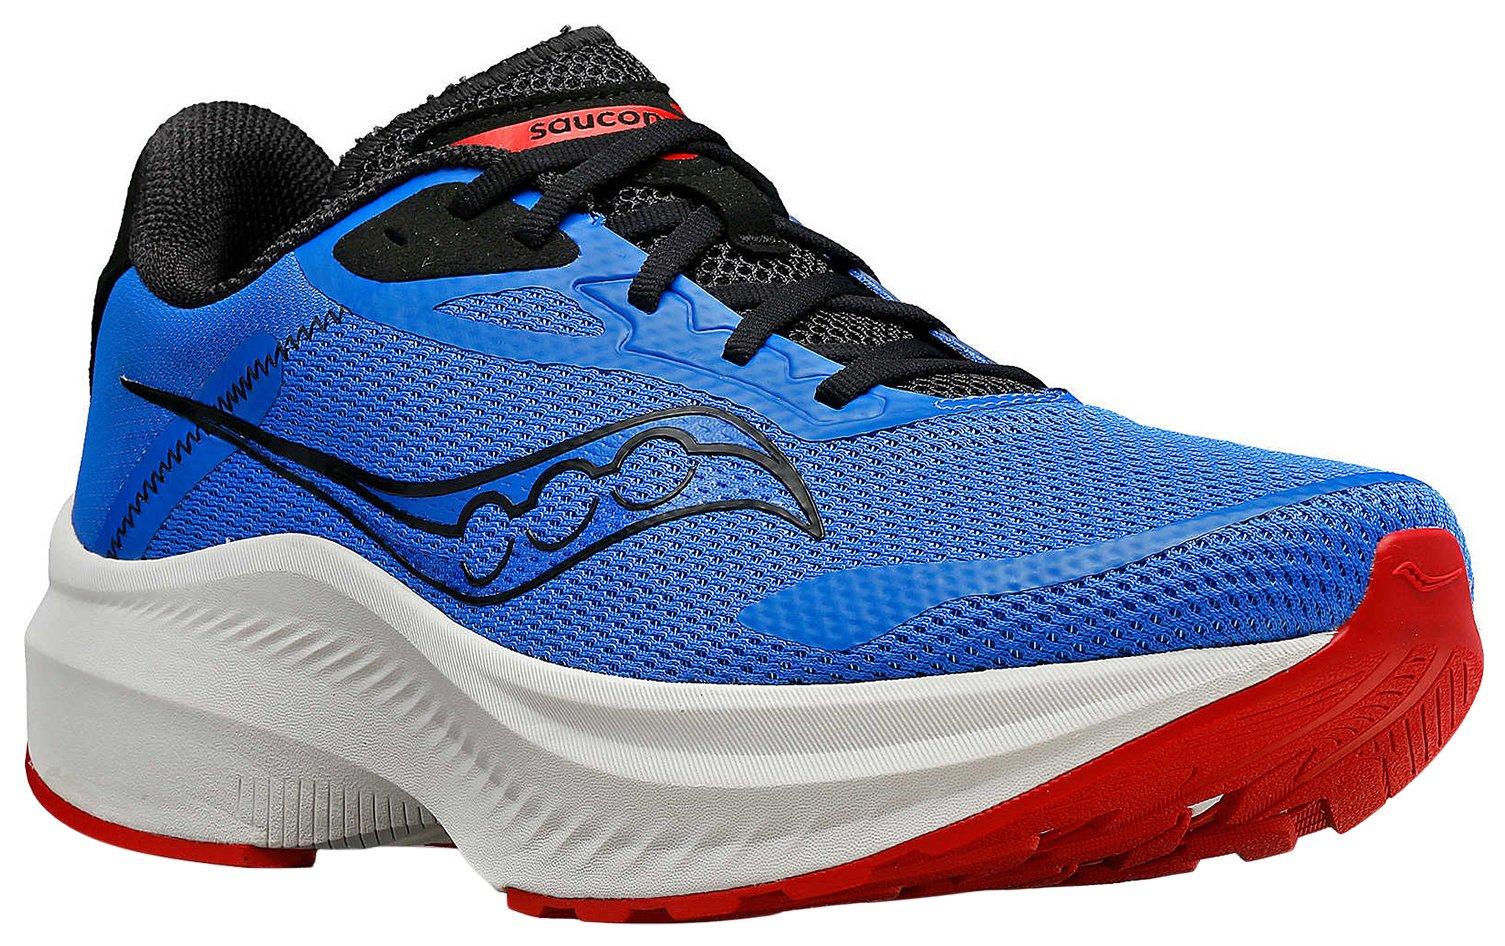 Saucony Mens Axon 3 Running Shoes